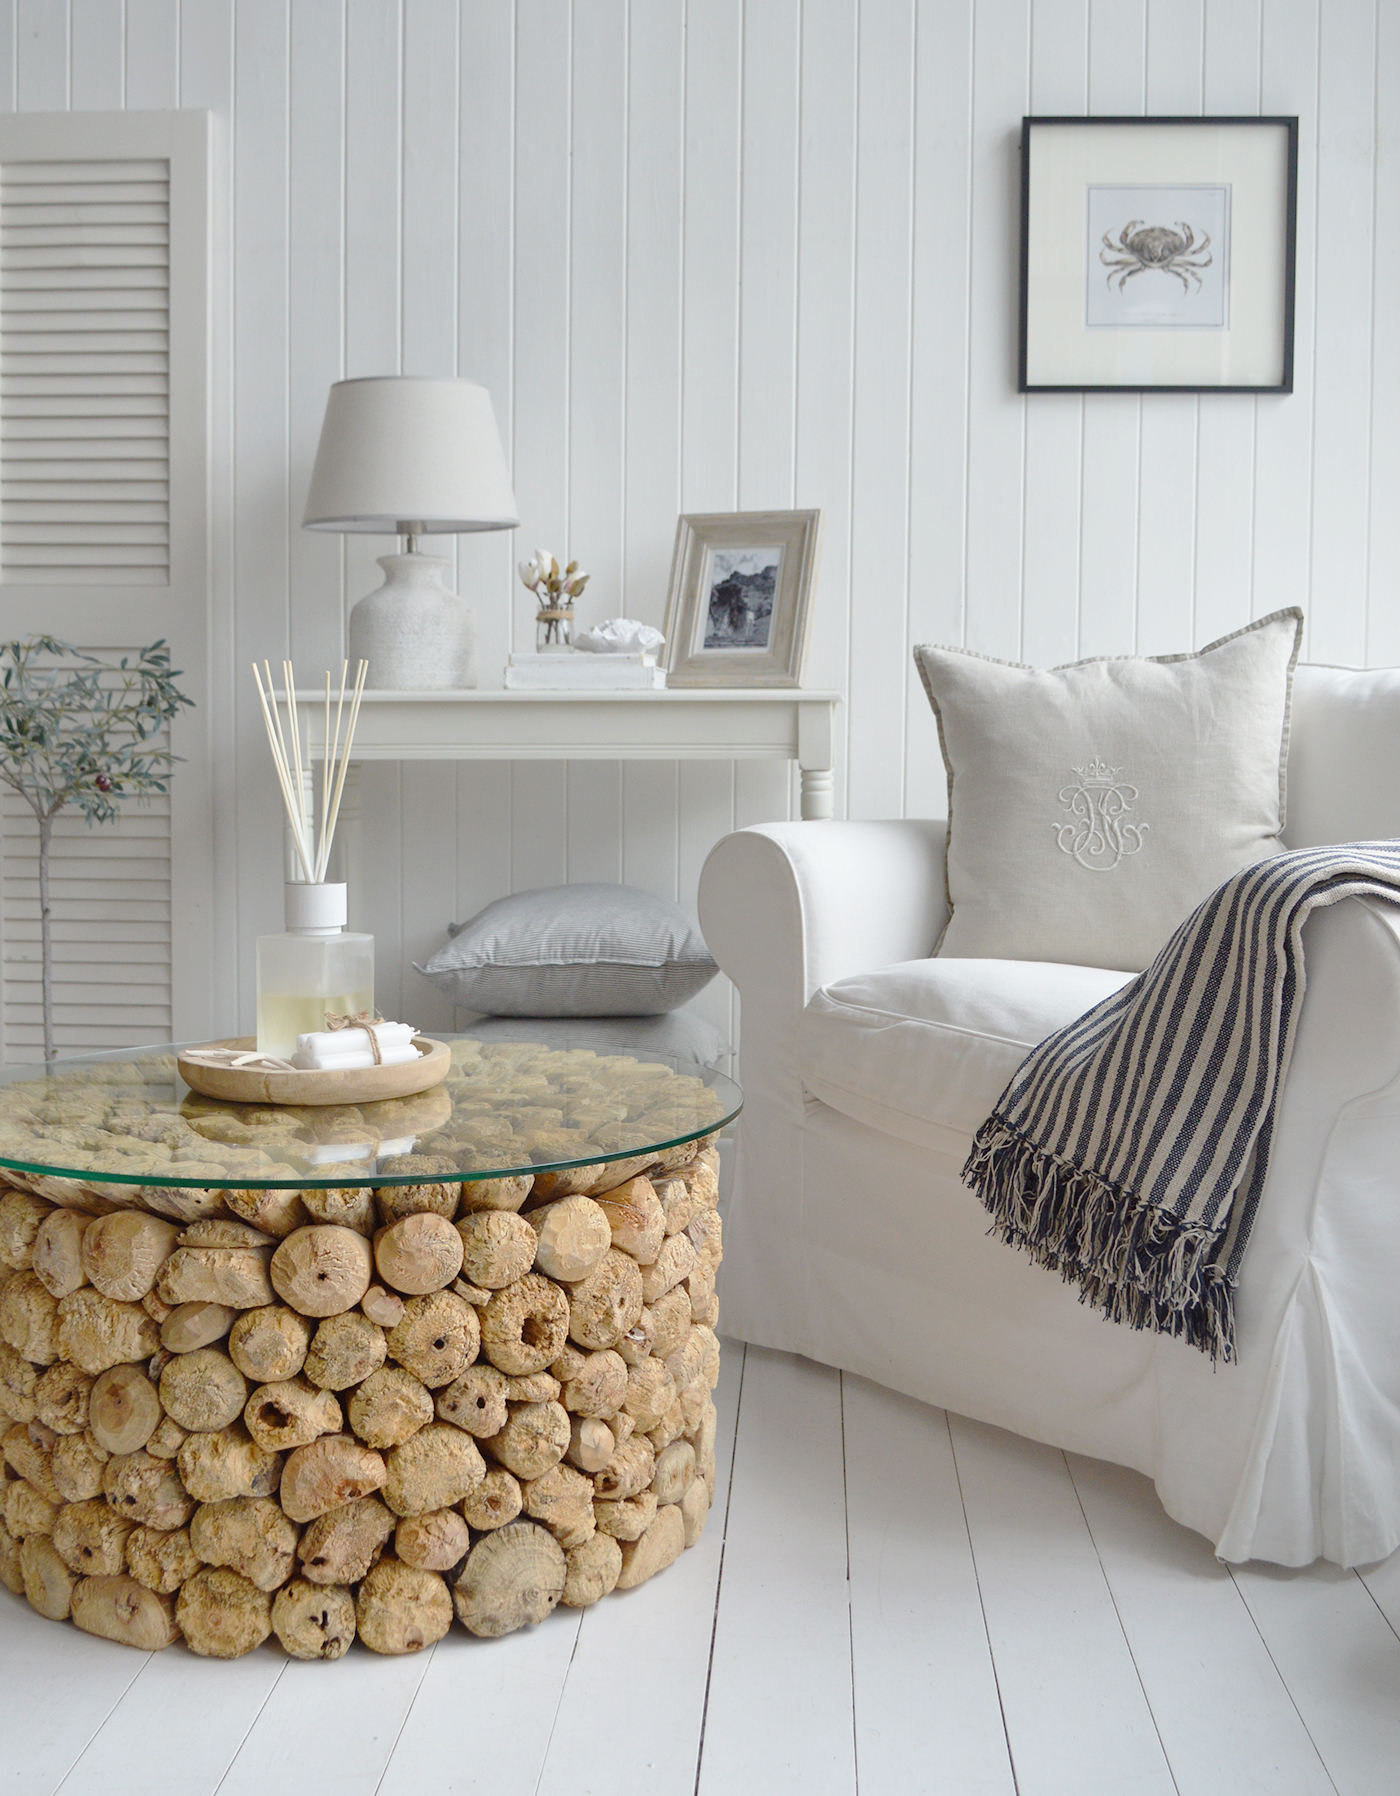 The Sag Harbor coastal coffee table, had crafted from pieces of driftwood in a Hamptons inspired living room by the sea